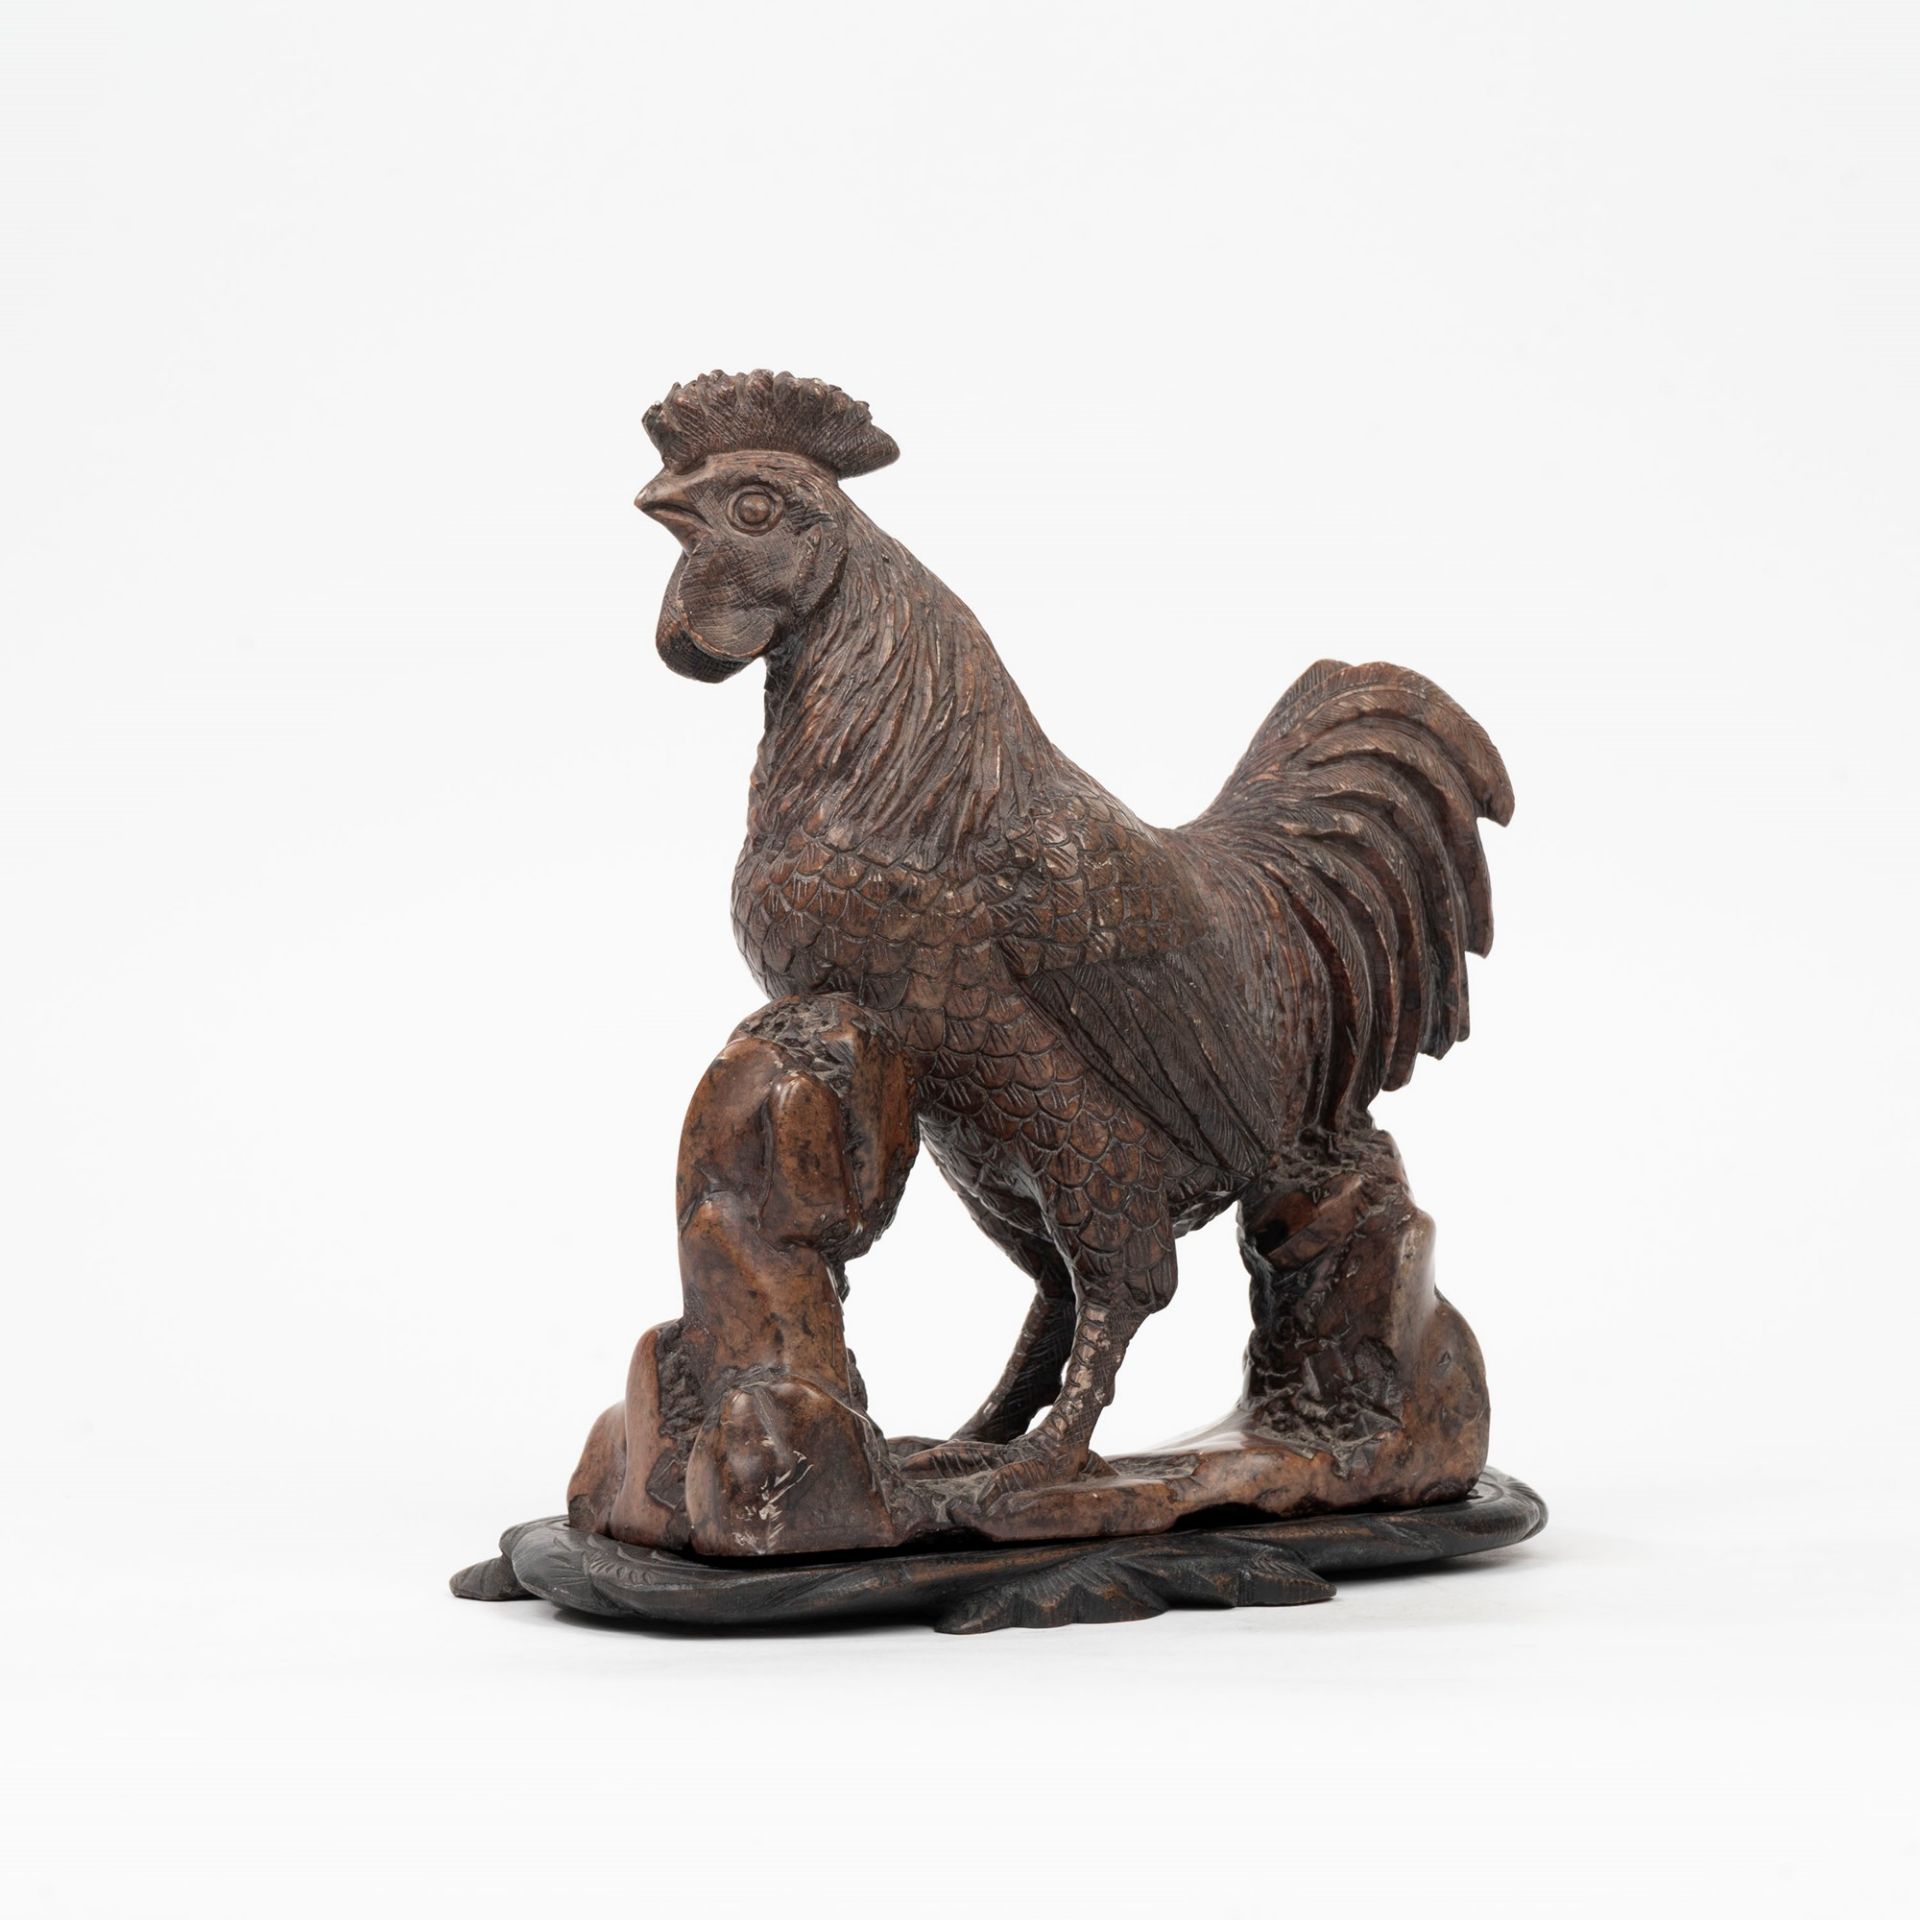 Soapstone sculpture depicting a rooster with wooden base, China, early 20th century - Image 2 of 2